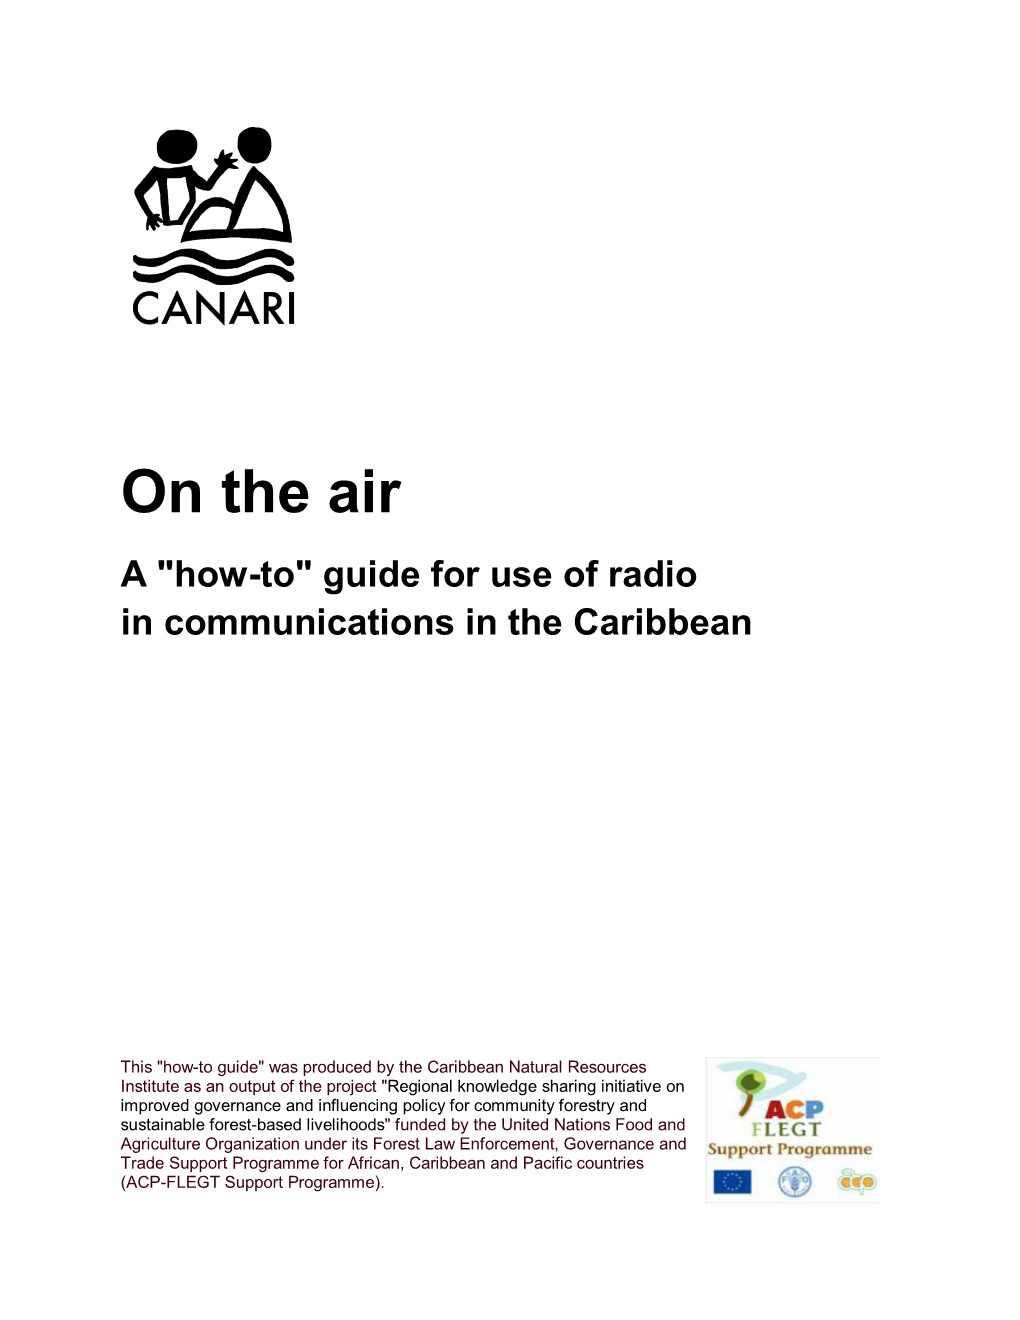 On the Air a "How-To" Guide for Use of Radio in Communications in the Caribbean